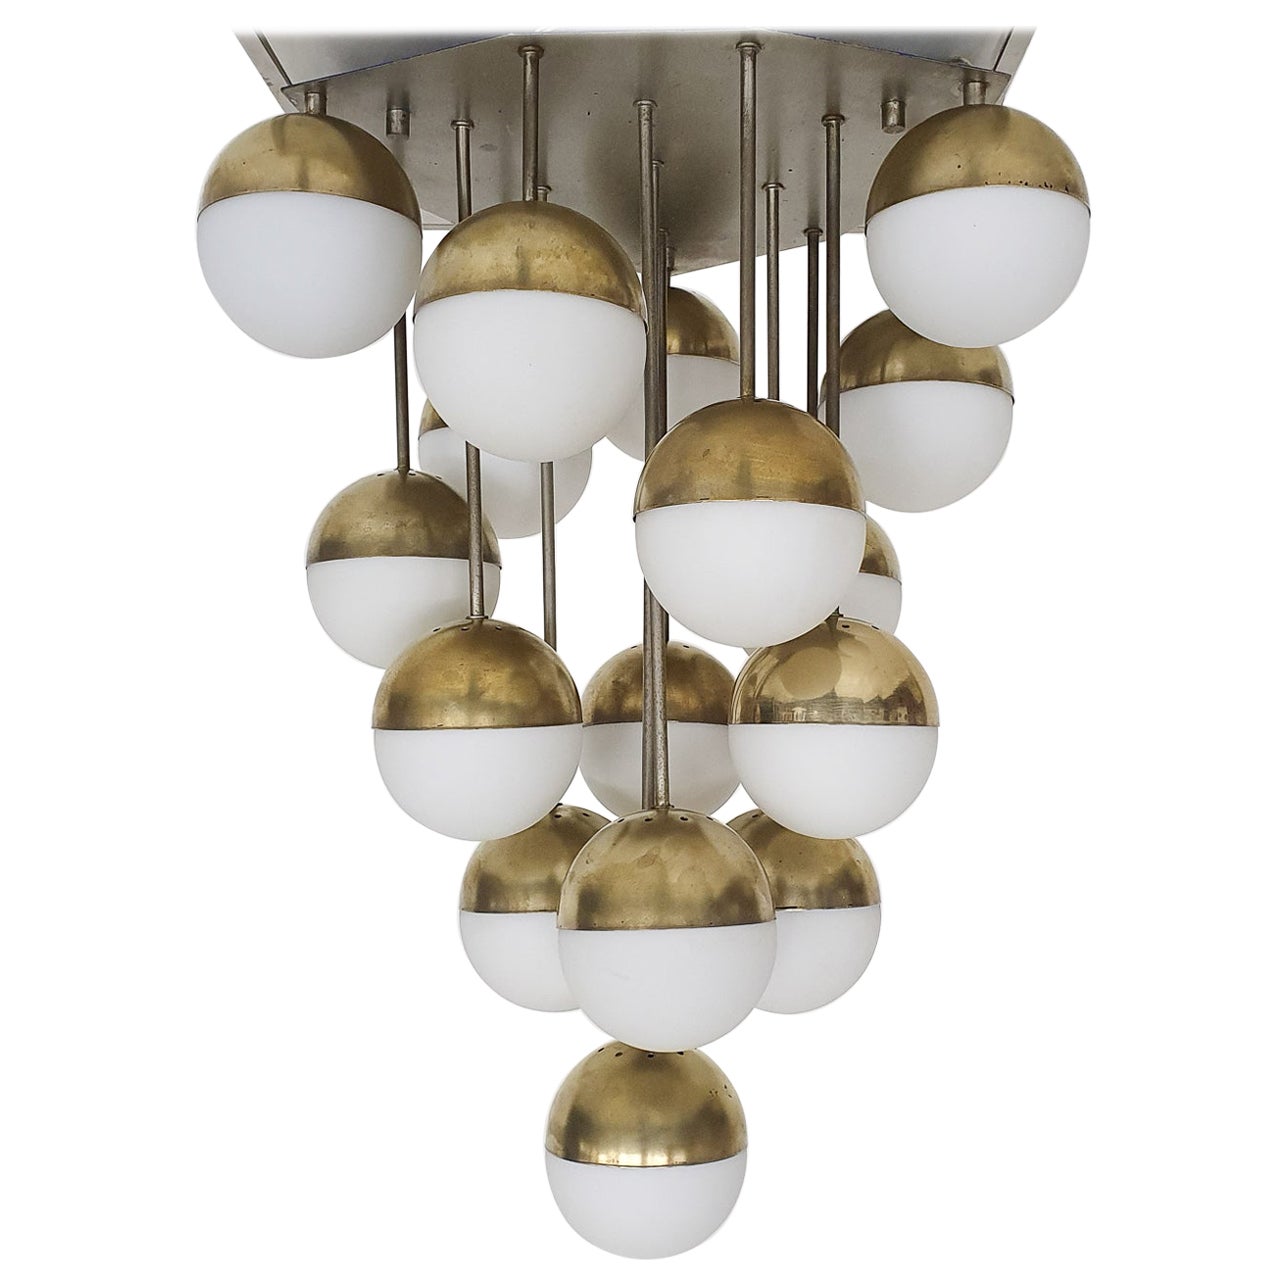 Mid-century chandelier by Stilnovo with 16 globes, Italy 1960's